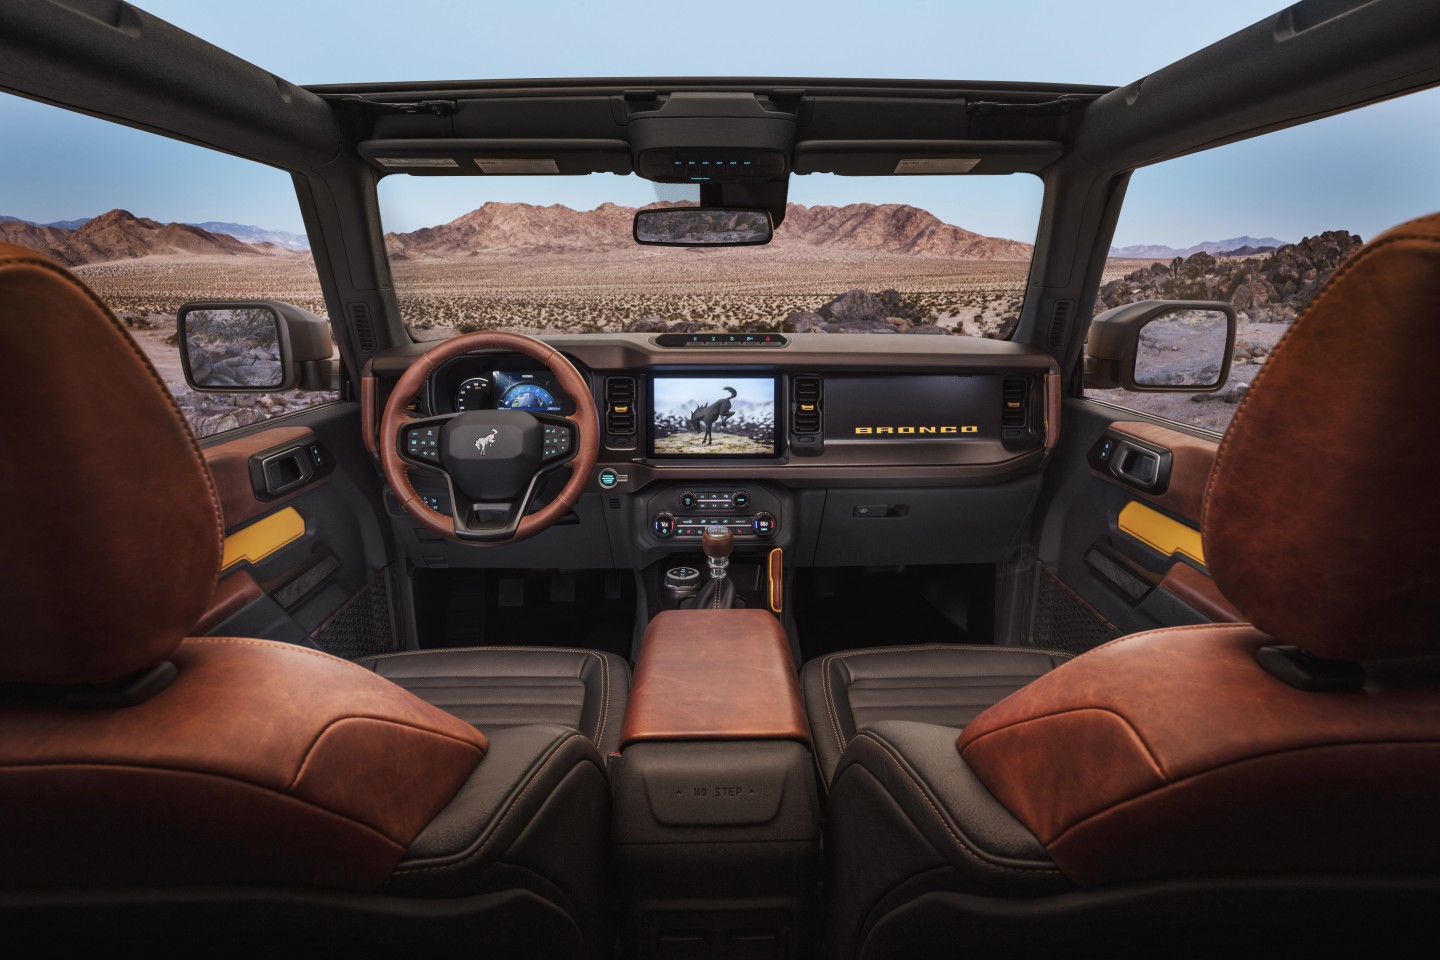 The 2021 Bronco will offer an available 12-inch SYNC 4 system, optional leather trim seating, console-mounted transmission shifter/selector and G.O.A.T. Modes control knob